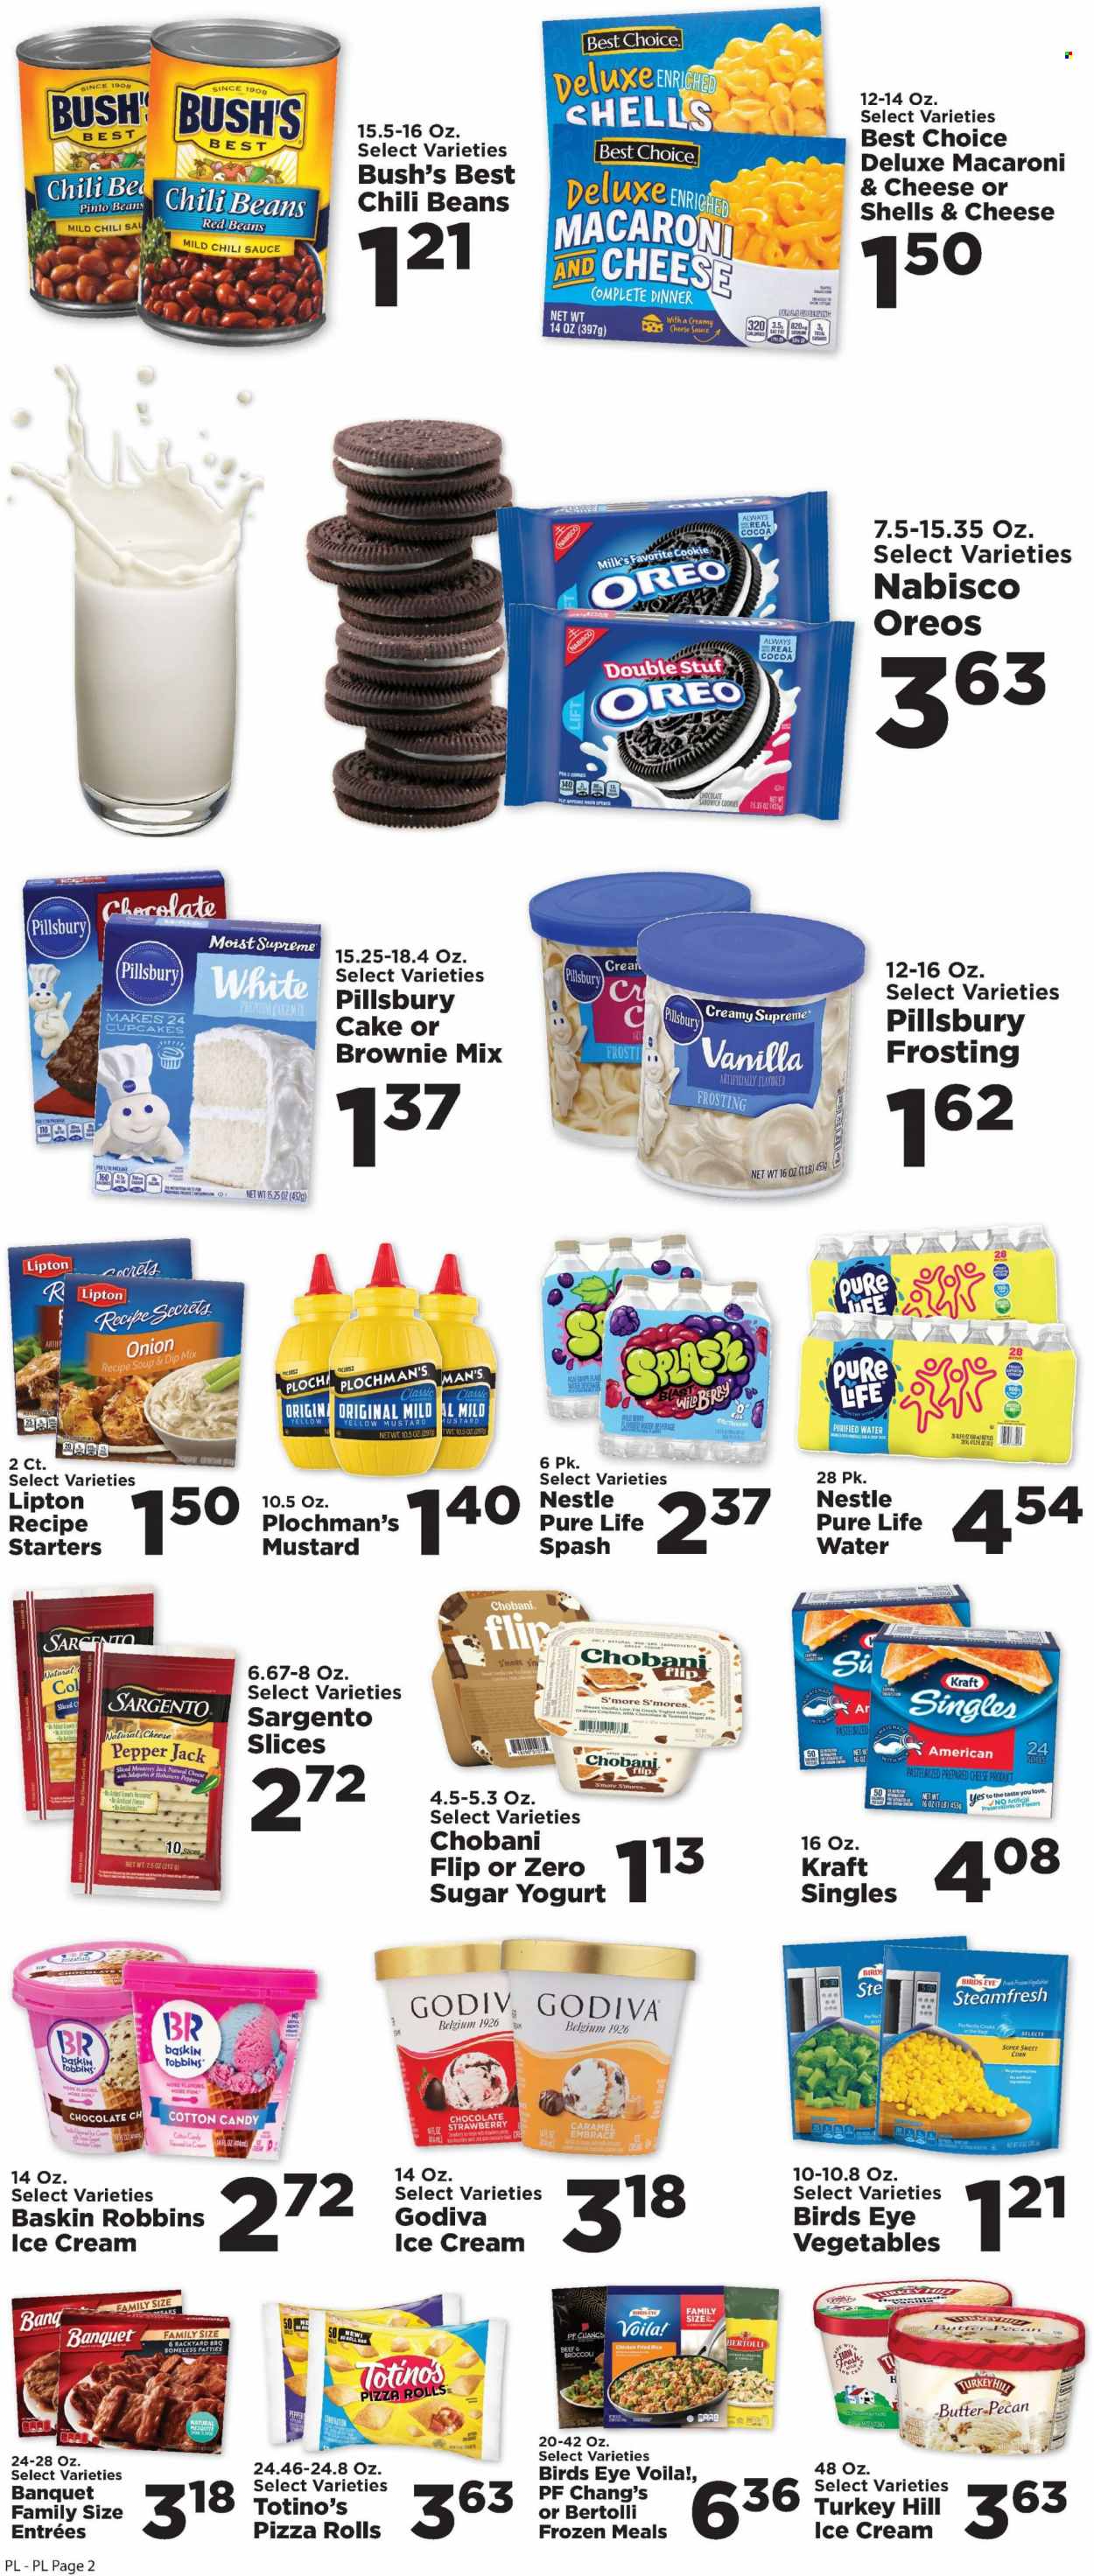 thumbnail - Price Less Foods Flyer - 02/01/2023 - 02/07/2023 - Sales products - cake, pizza rolls, cupcake, brownie mix, corn, jalapeño, macaroni & cheese, pizza, sandwich, soup, Pillsbury, Bird's Eye, Kraft®, Bertolli, Monterey Jack cheese, sandwich slices, Pepper Jack cheese, Kraft Singles, Sargento, greek yoghurt, Oreo, yoghurt, Chobani, frozen vegetables, cookies, graham crackers, milk chocolate, Nestlé, sandwich cookies, Godiva, cotton candy, crackers, cocoa, frosting, red beans, pinto beans, chili beans, caramel, mustard, chilli sauce, Lipton, flavored water, purified water, Pure Life Water. Page 3.